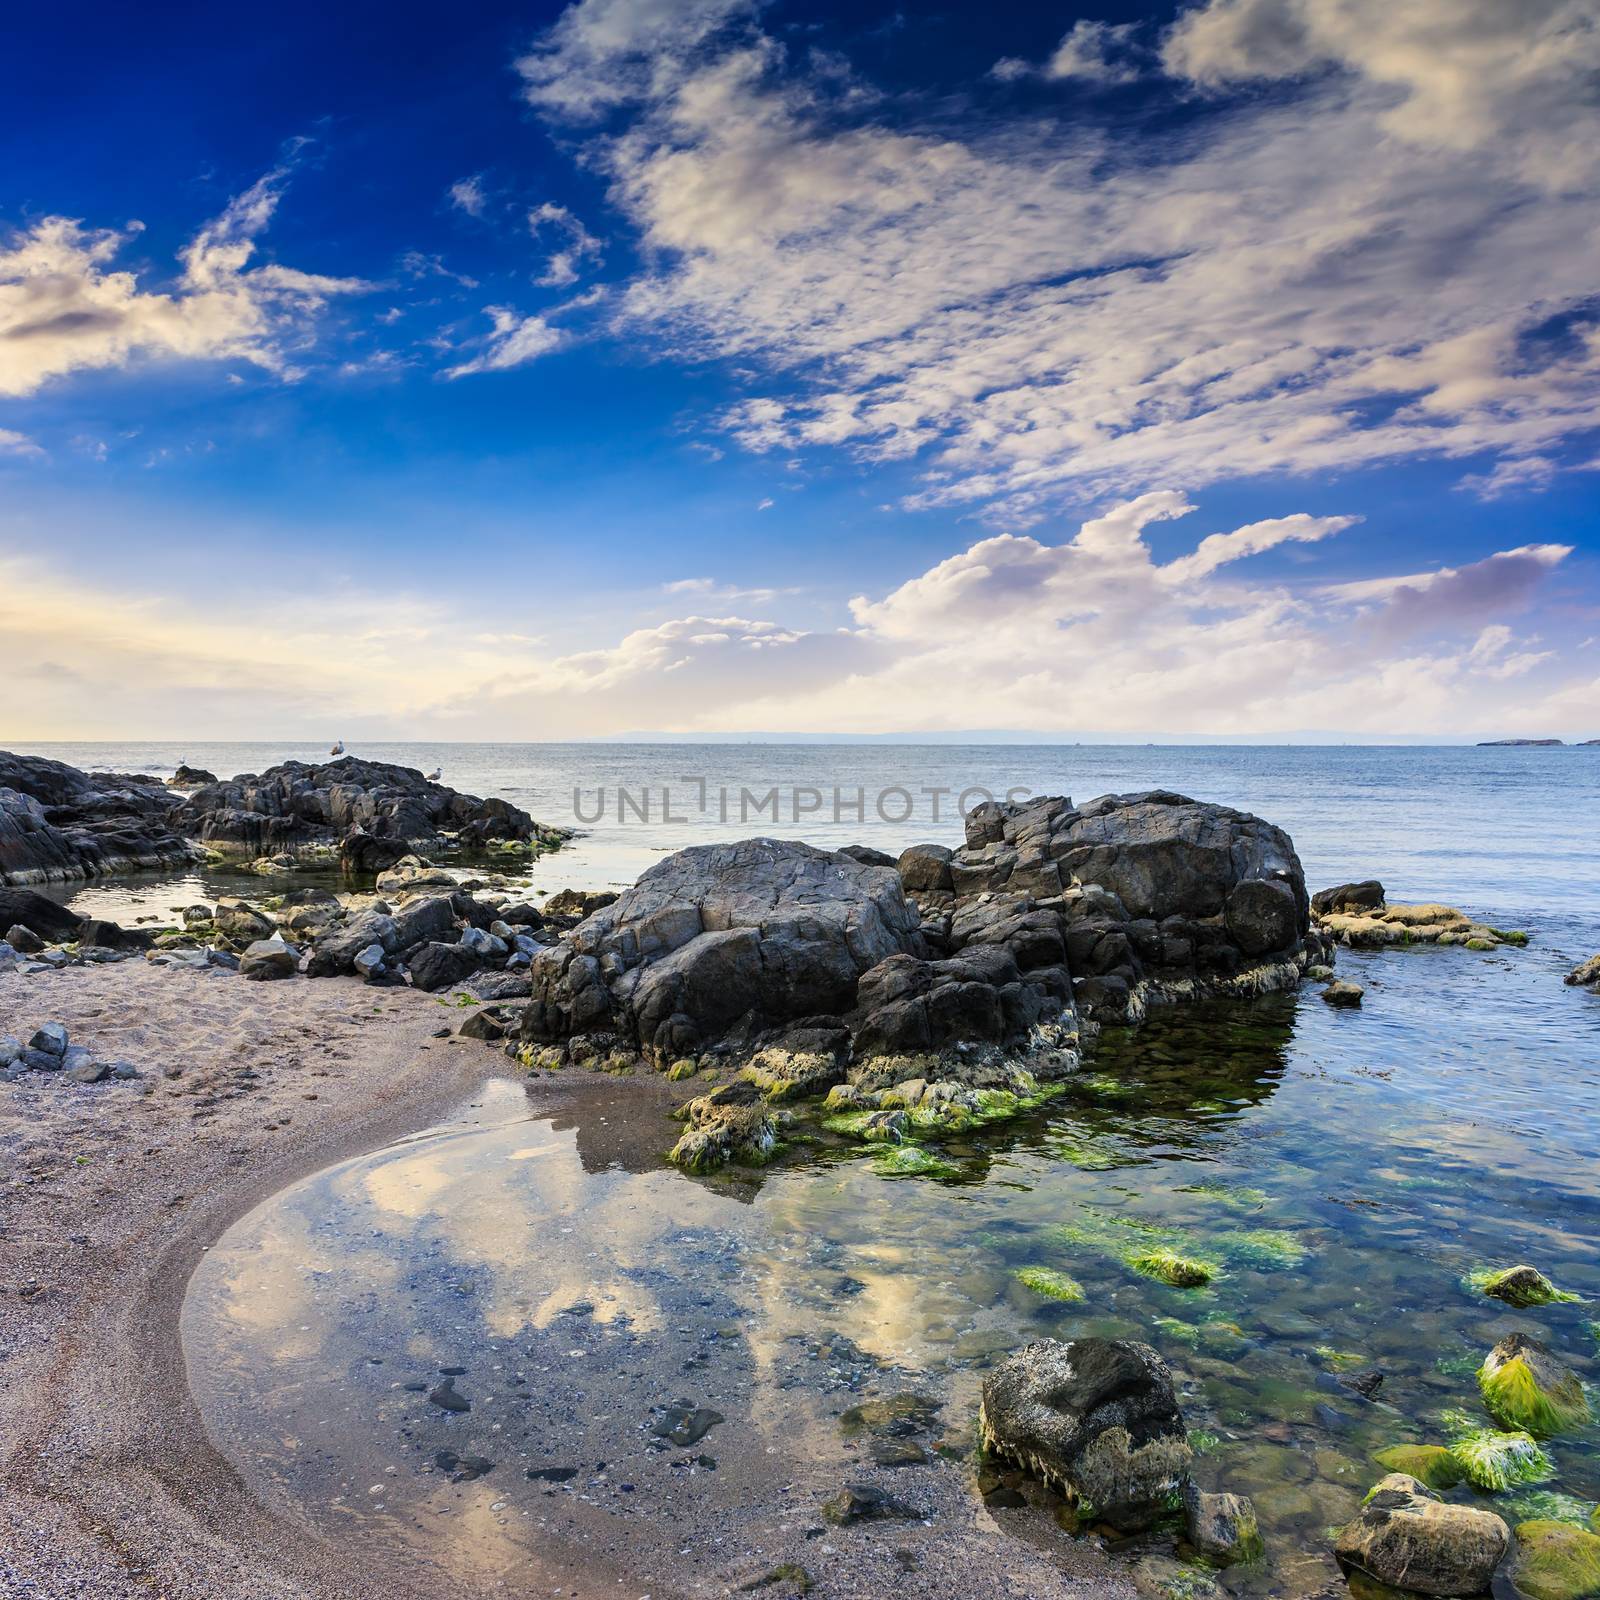 morning sea shore landscape with boulders sand and seaweed